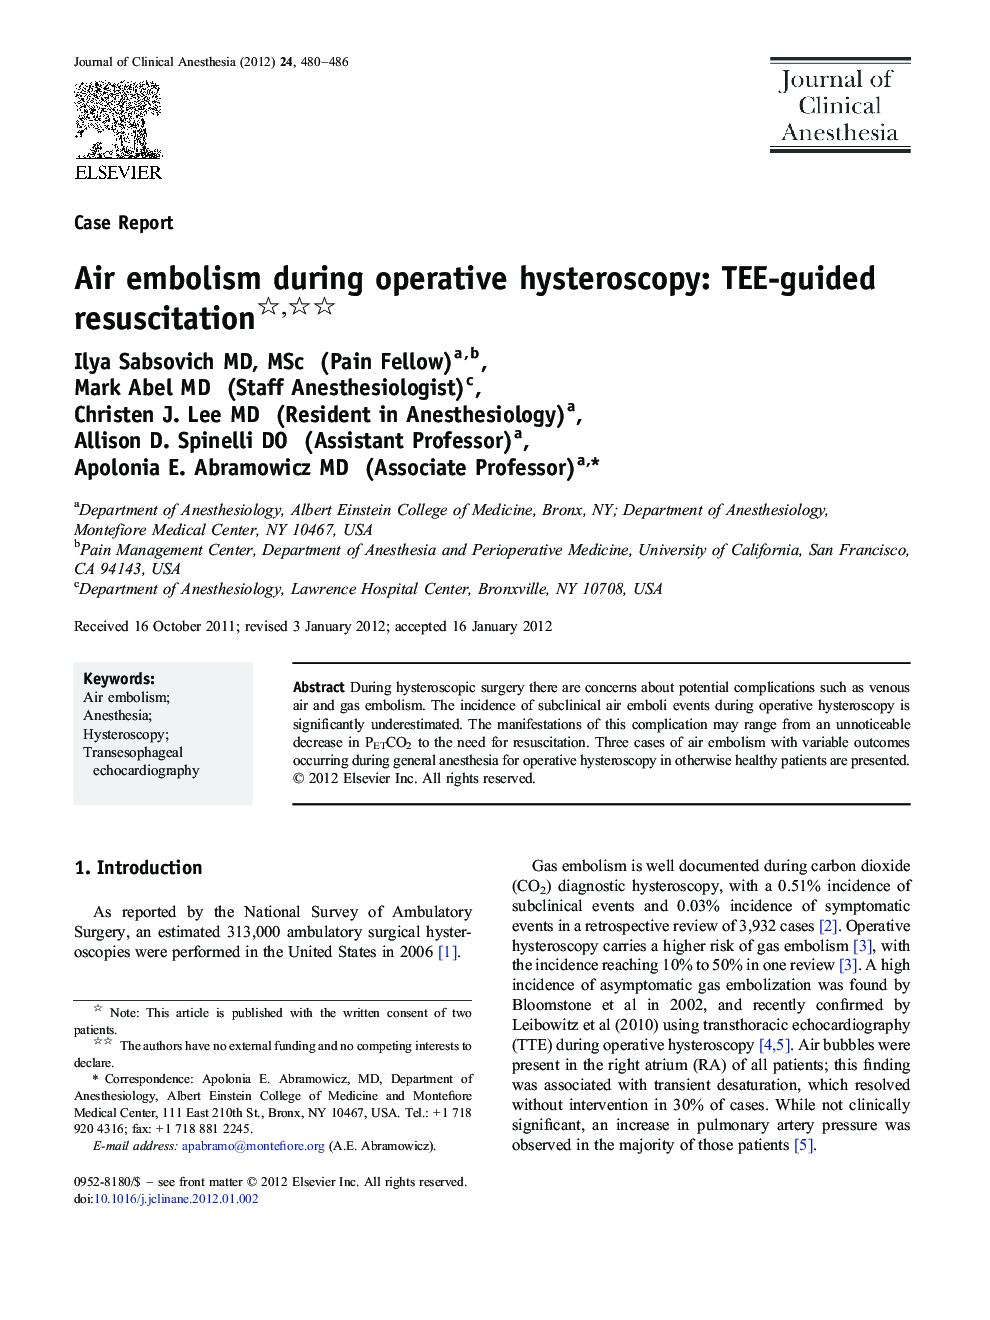 Air embolism during operative hysteroscopy: TEE-guided resuscitation 